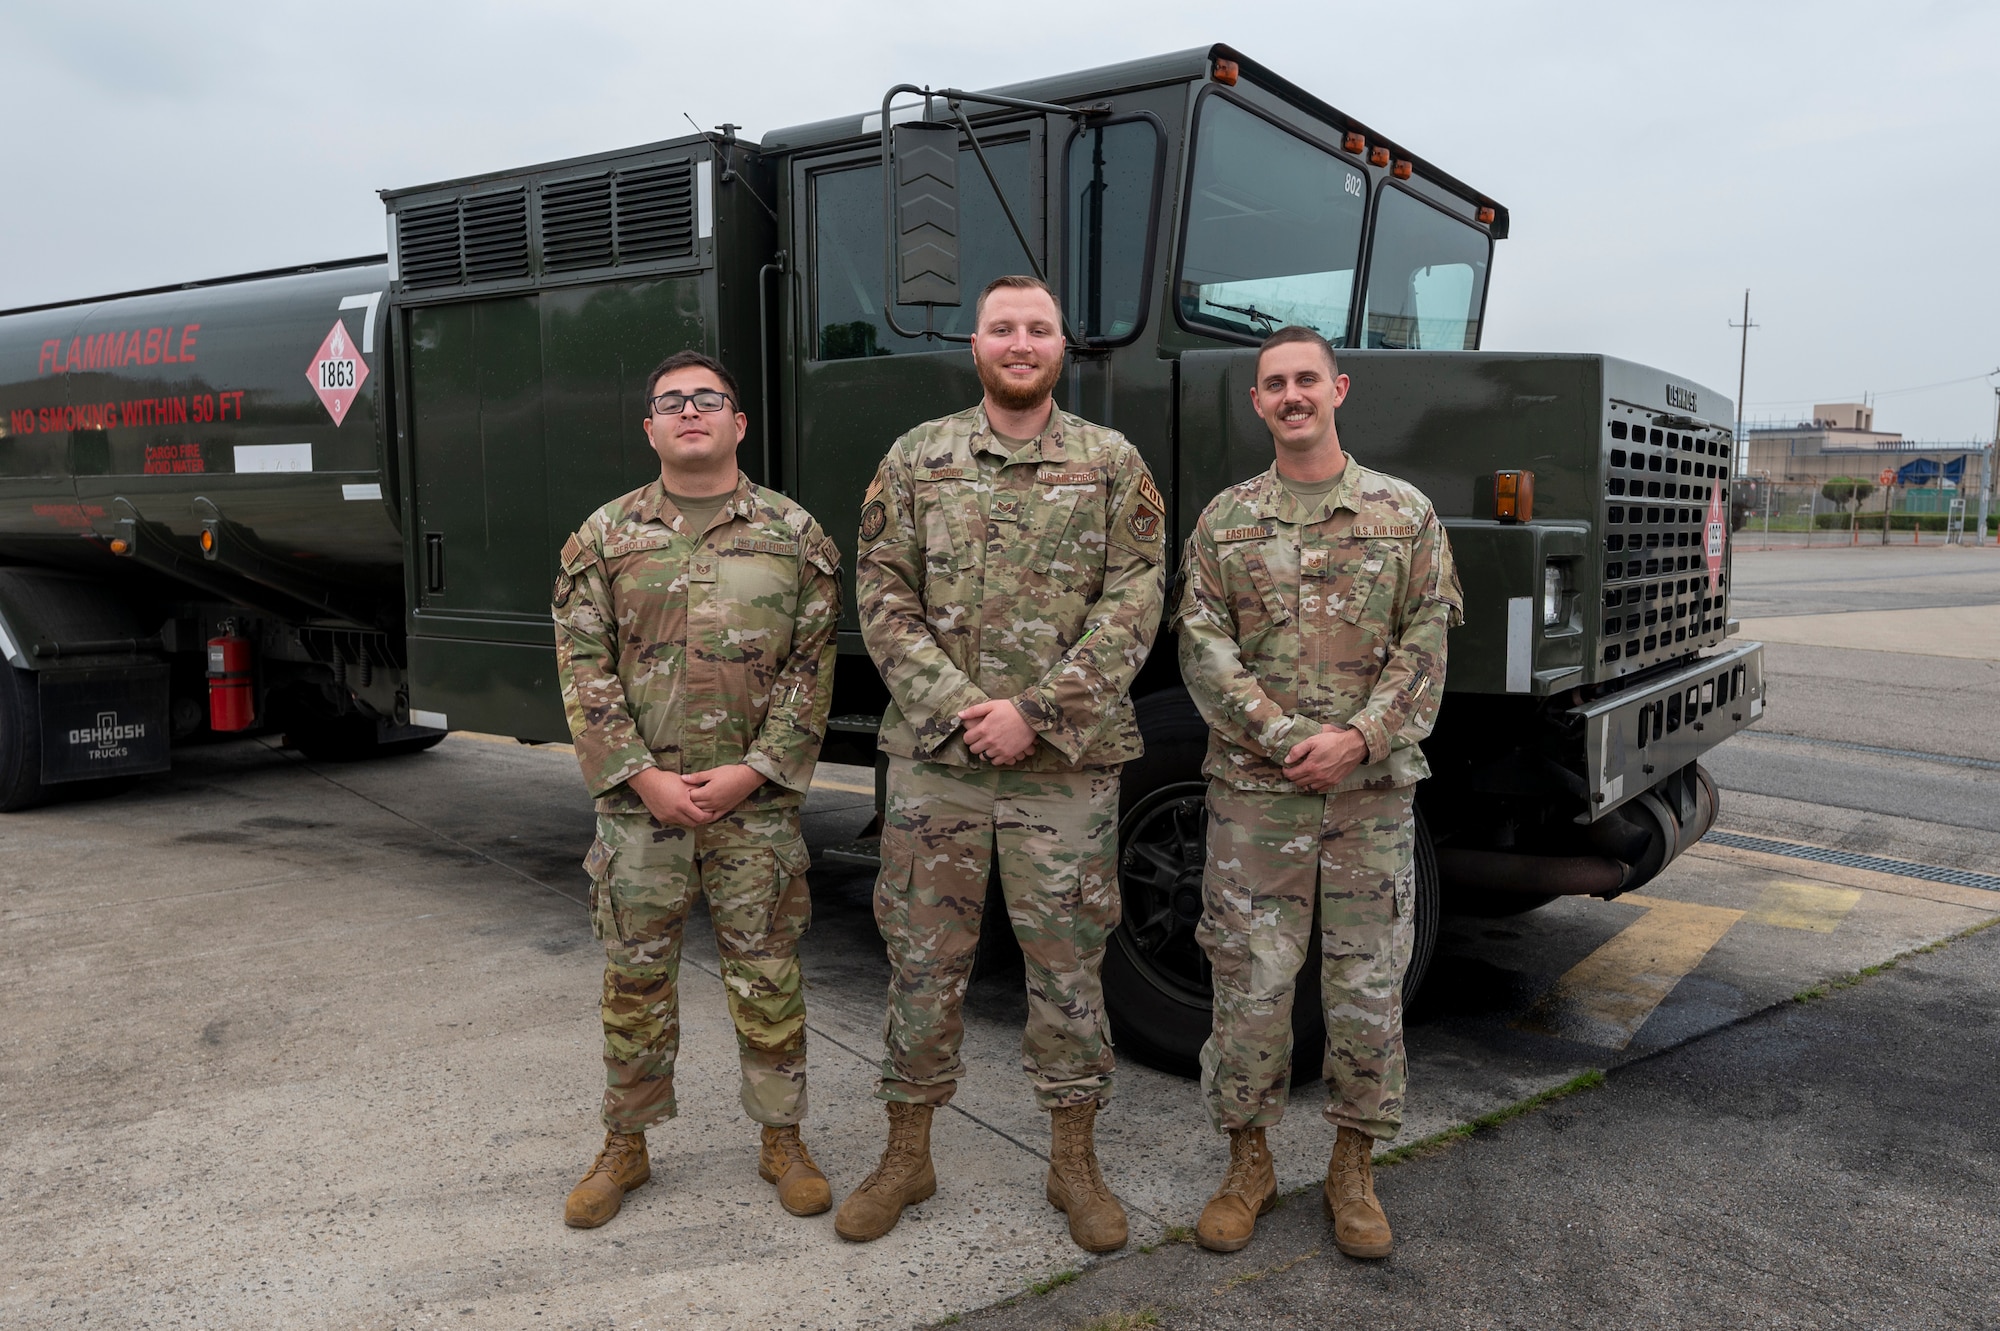 From left to right, U.S. Air Force Staff Sgt. Angel Rebollar, 51st Logistics Readiness Squadron (LRS) fuels laboratory non-commissioned officer in charge (NCOIC); Staff Sgt. Lucas Amodeo, 51st LRS fuels mobile distribution supervisor, and Tech. Sgt. Mark Eastman, 51st LRS fuels distribution NCOIC, pose for a photo at Osan Air Base, Republic of Korea, June 29, 2023. These three Airmen helped prepare, sustain and recover Andersen Air Force Base, Guam, from Typhoon Mawar May 22 to June 5, 2023. The team assisted Andersen AFB’s 36th LRS in securing 60 million gallons of fuel and 30 refueling assets, protecting $245 million supplies from the storm. (U.S. Air Force photo by Senior Airman Aaron Edwards)